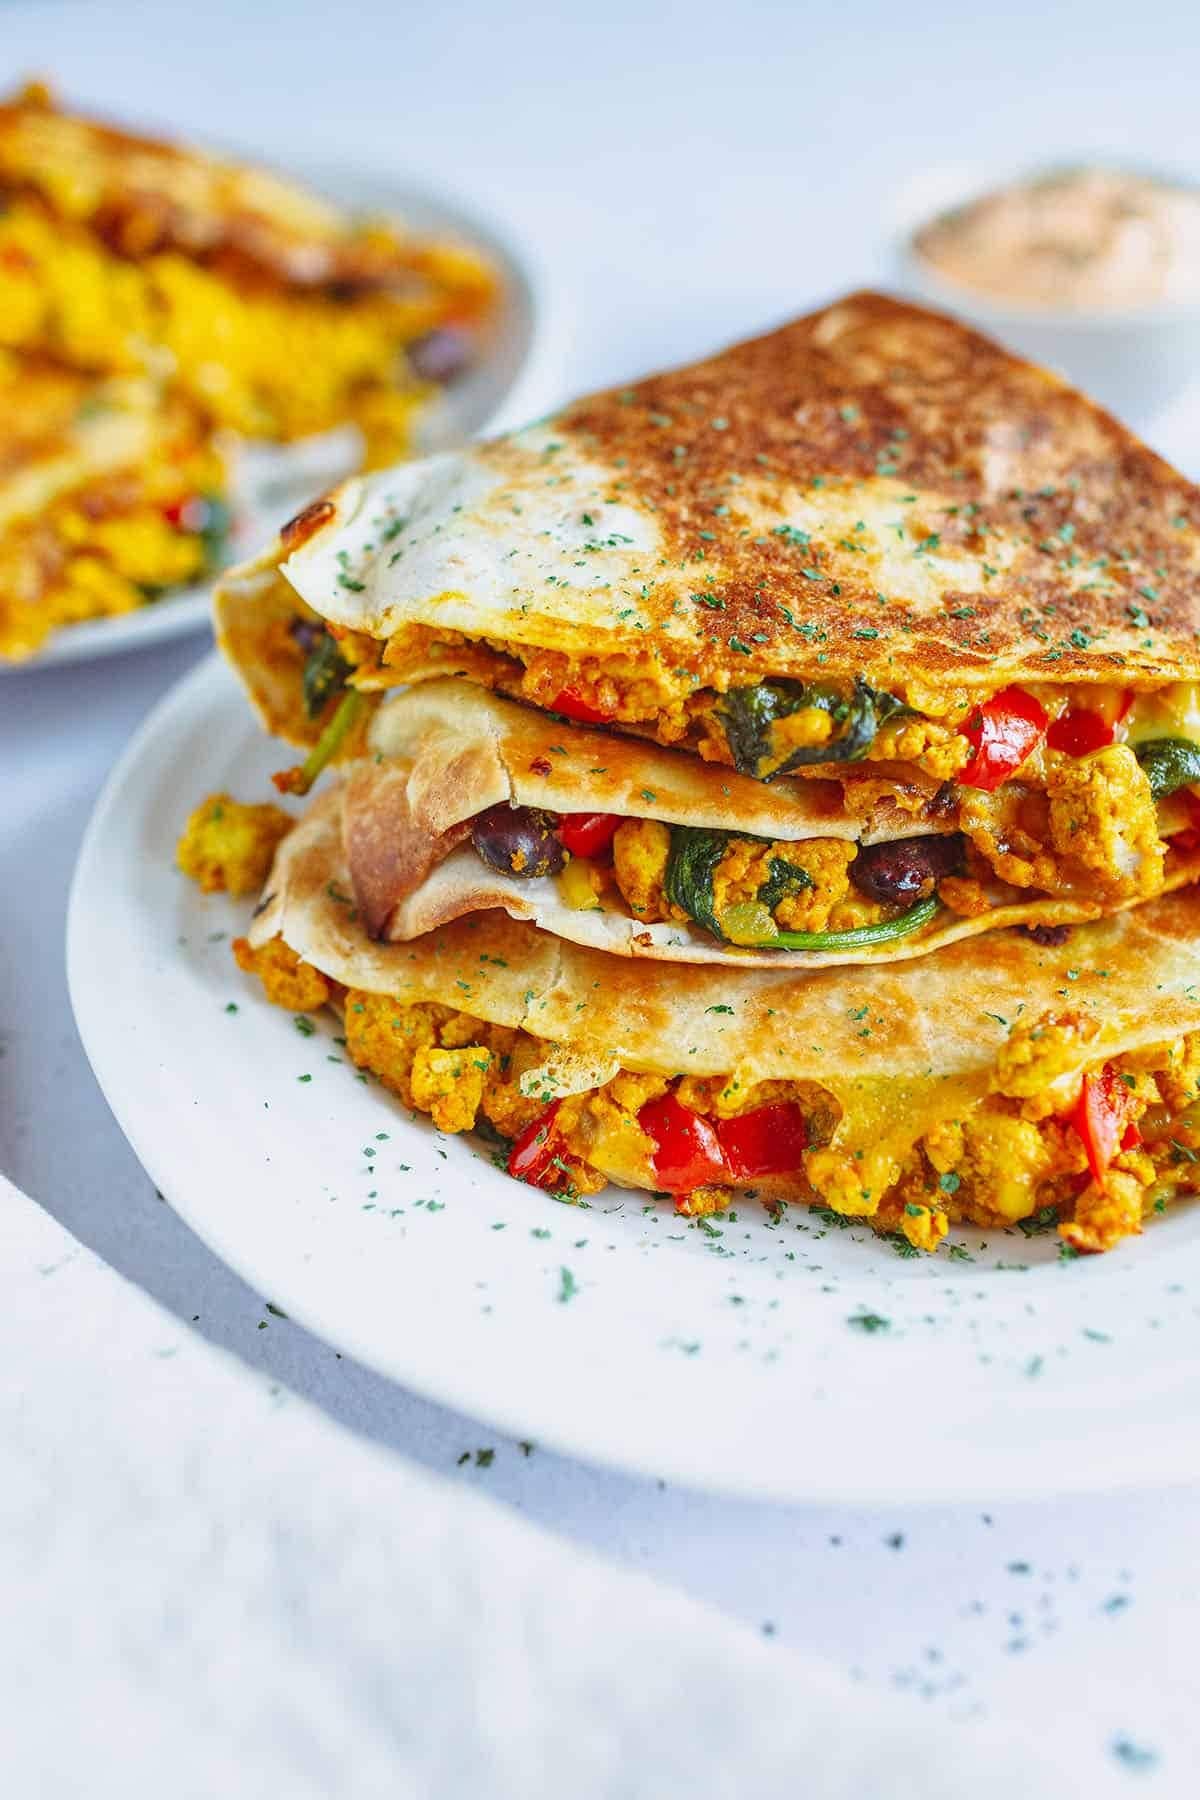 Quesadilla with with a tofu scramble, red peppers, red kidney beans, spinach, and vegan cheese filling.